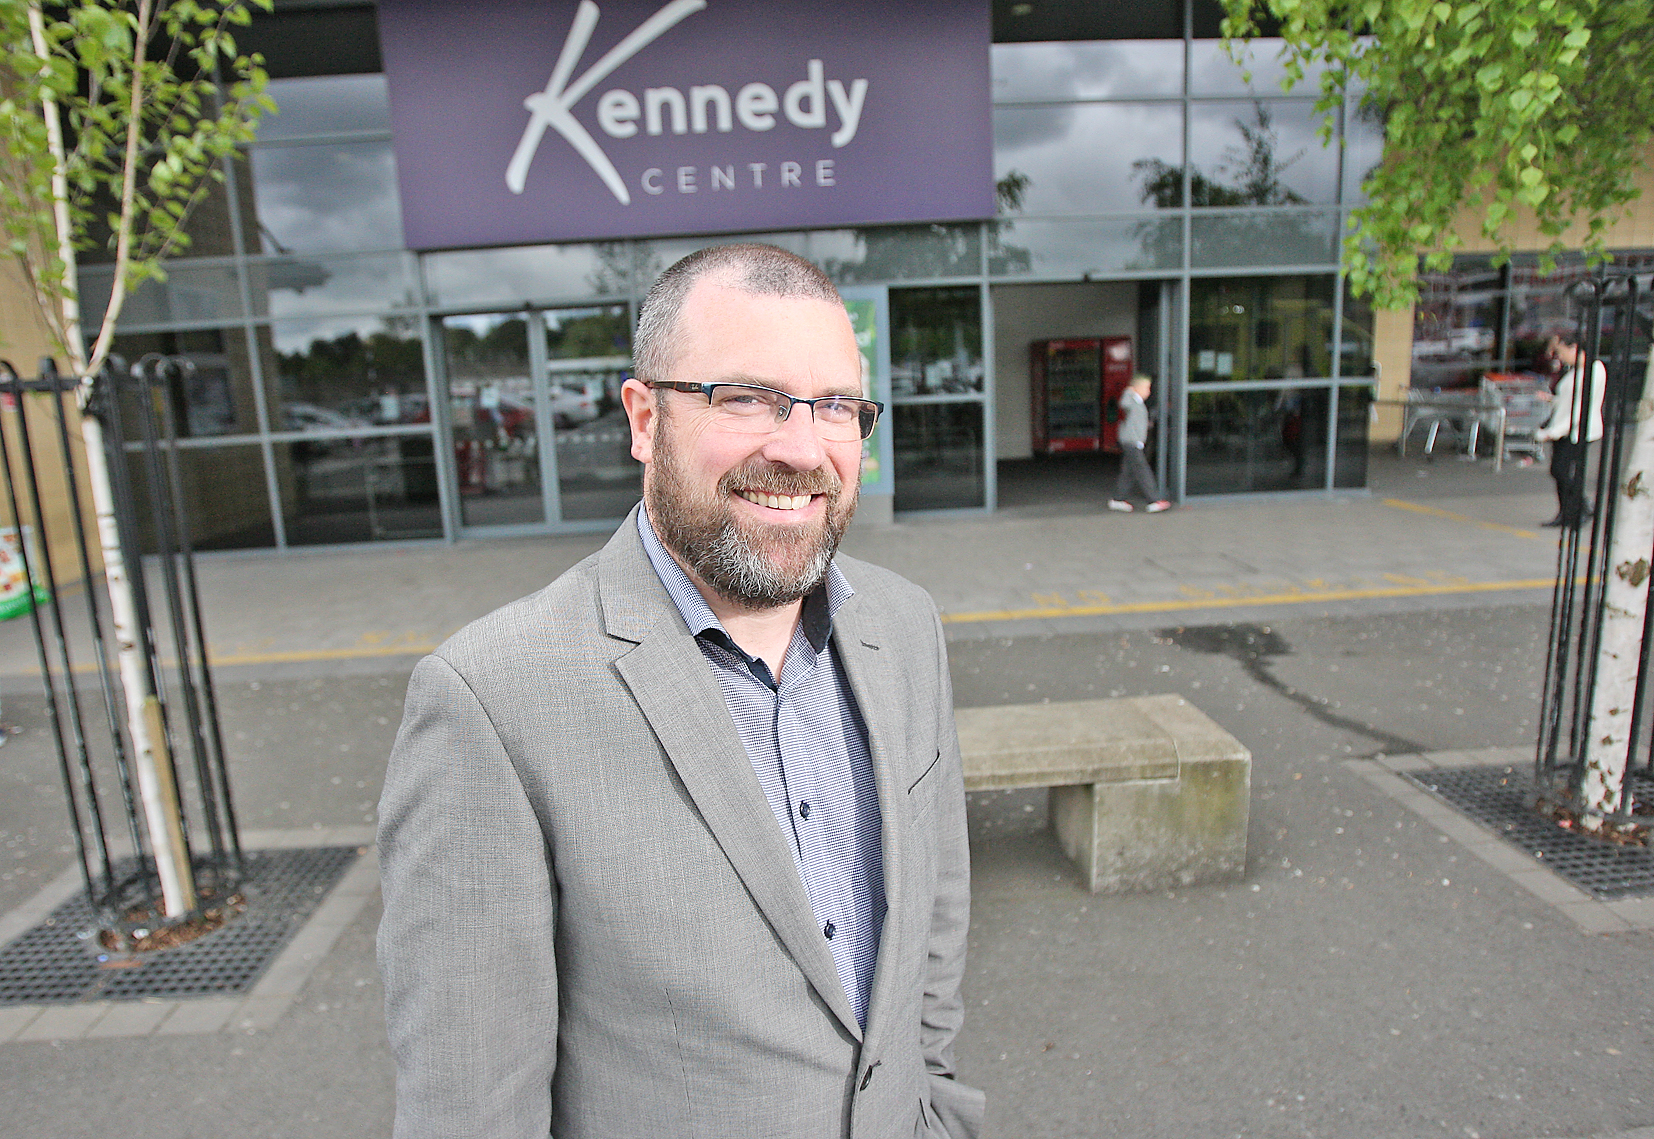 West Belfast’s Kennedy Centre complex will hear confessions for the first time 